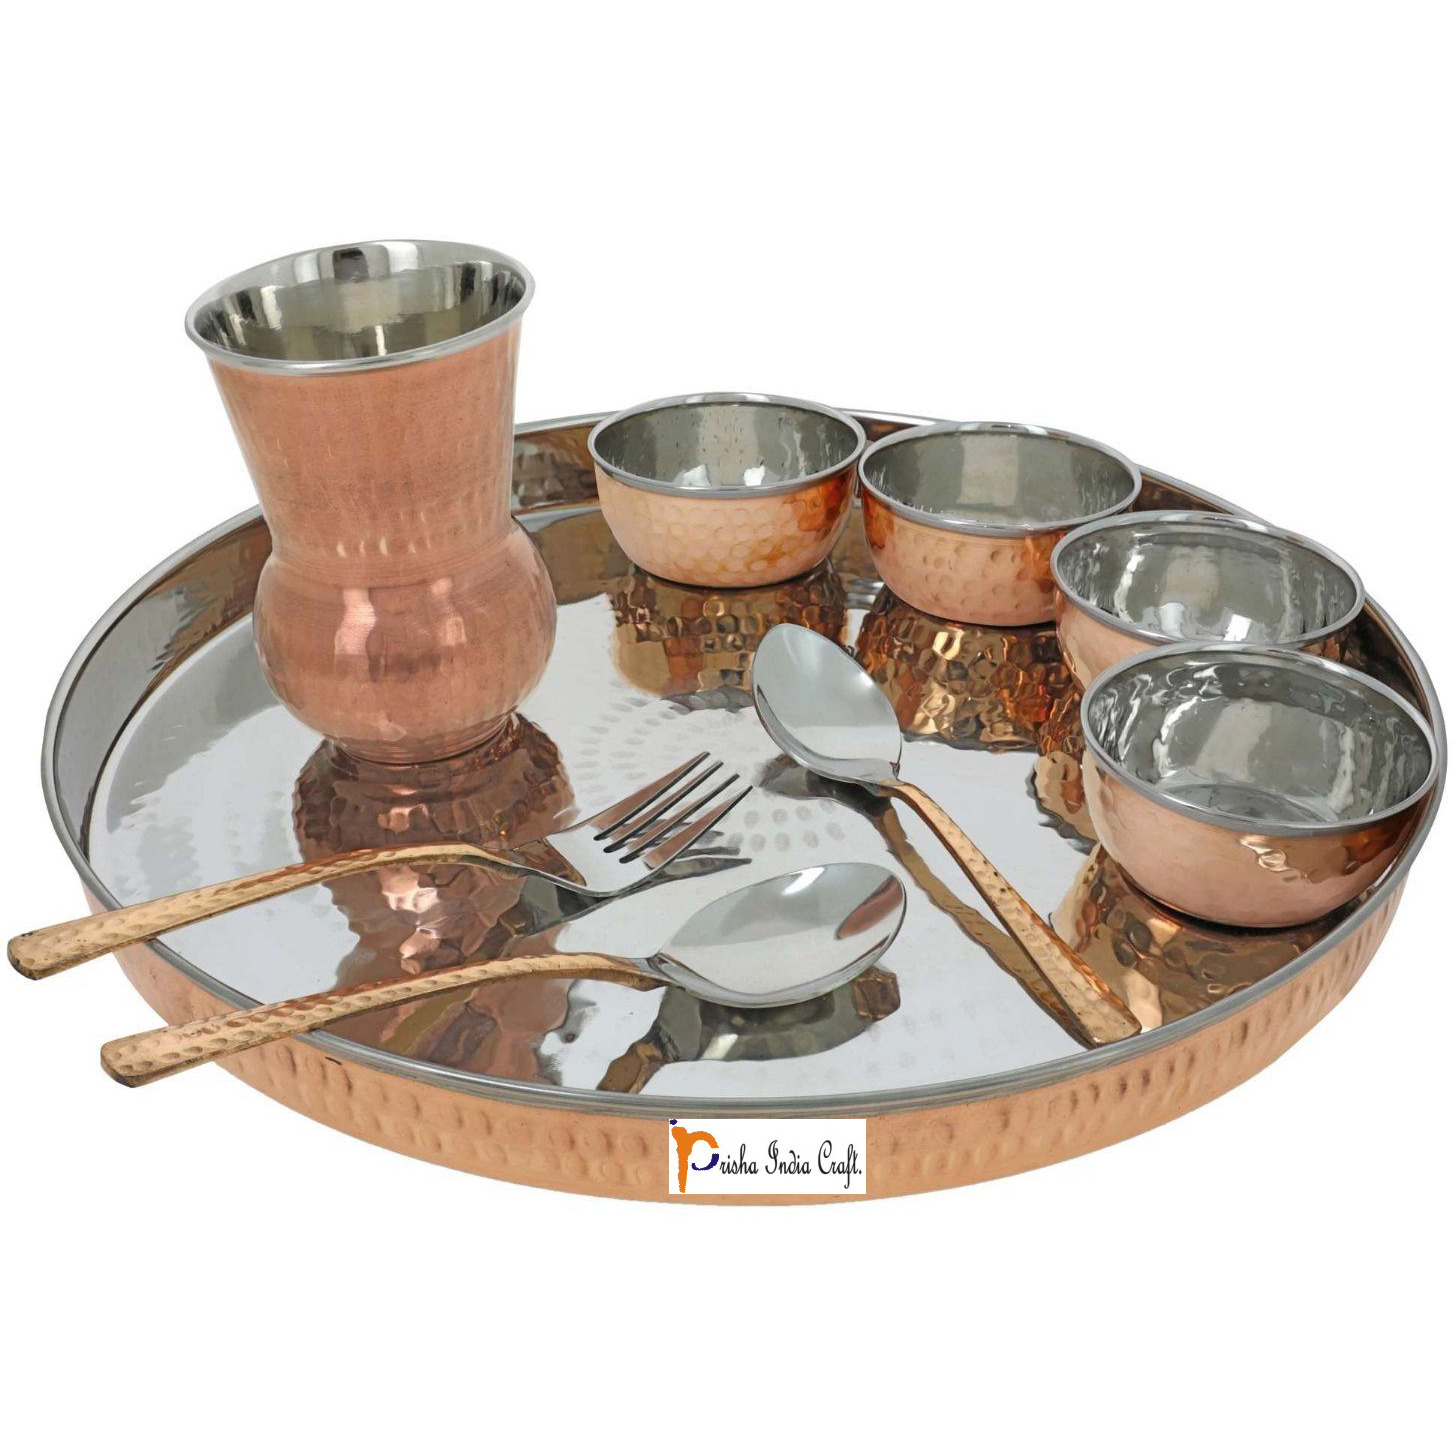 Prisha India Craft B. Set of 3 Dinnerware Traditional Stainless Steel Copper Dinner Set of Thali Plate, Bowls, Glass and Spoons, Dia 13  With 1 Pure Copper Hammered Pitcher Jug - Christmas Gift